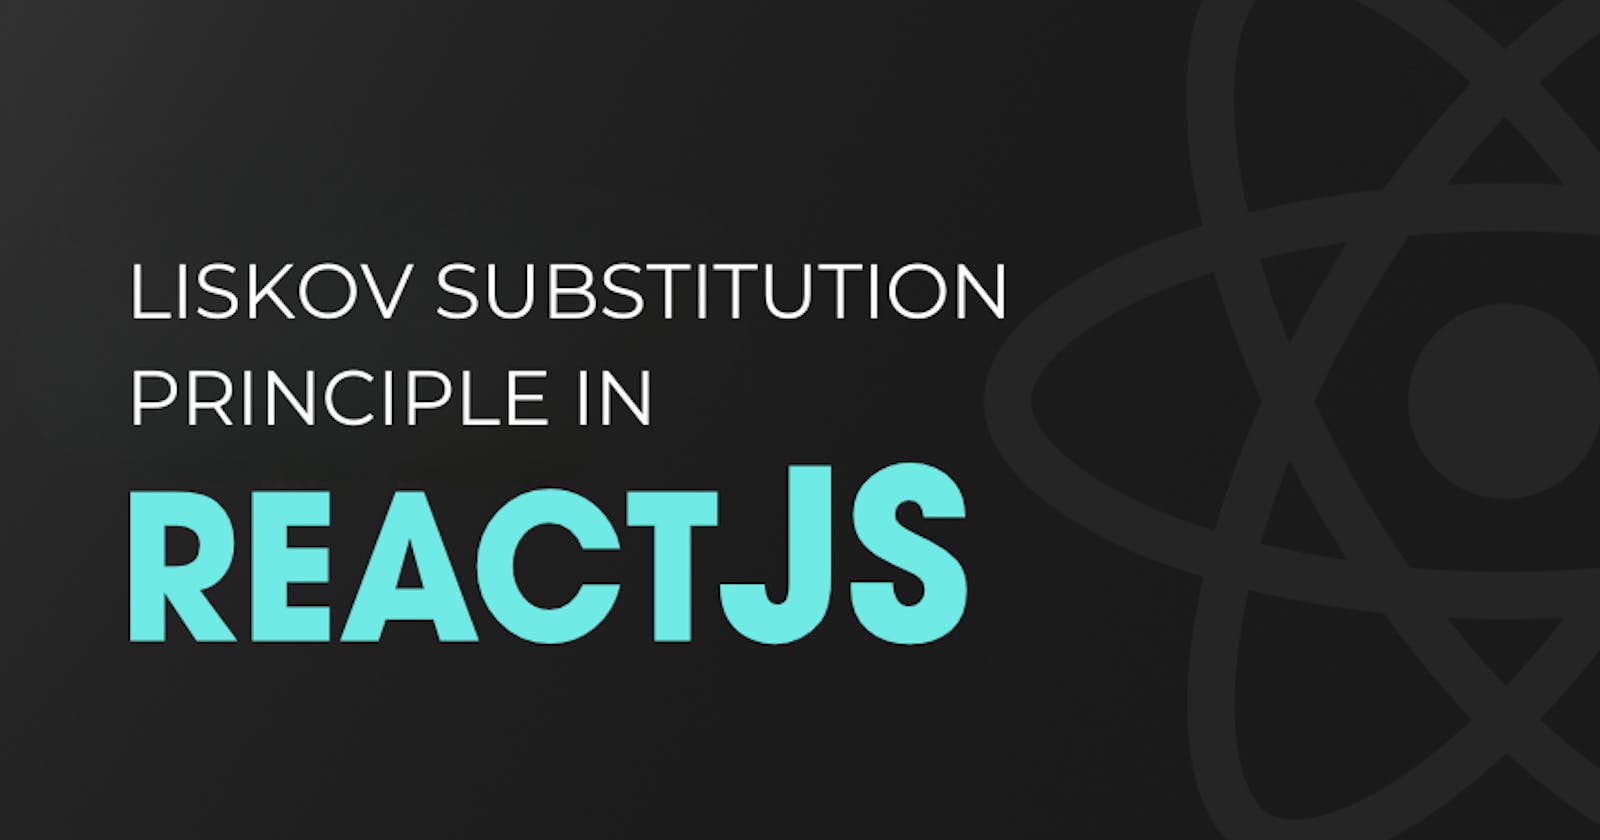 Using the Liskov Substitution Principle (LSP) in React